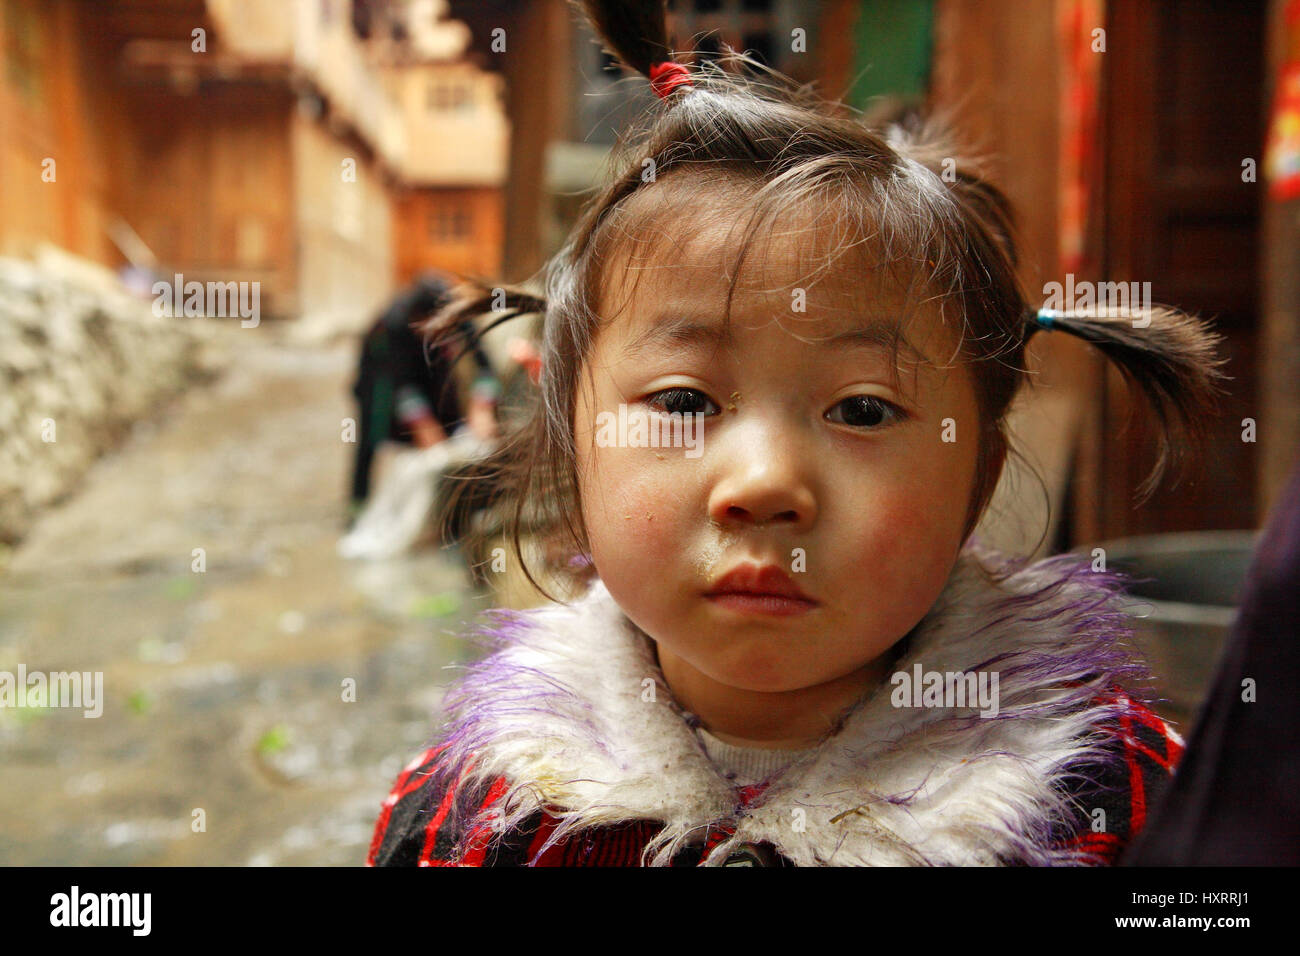 GUIZHOU PROVINCE, CHINA - APRIL 13: Rural girl 4 years old, standing on a village street in south-west China, April 13, 2010. Asian child in the rural Stock Photo